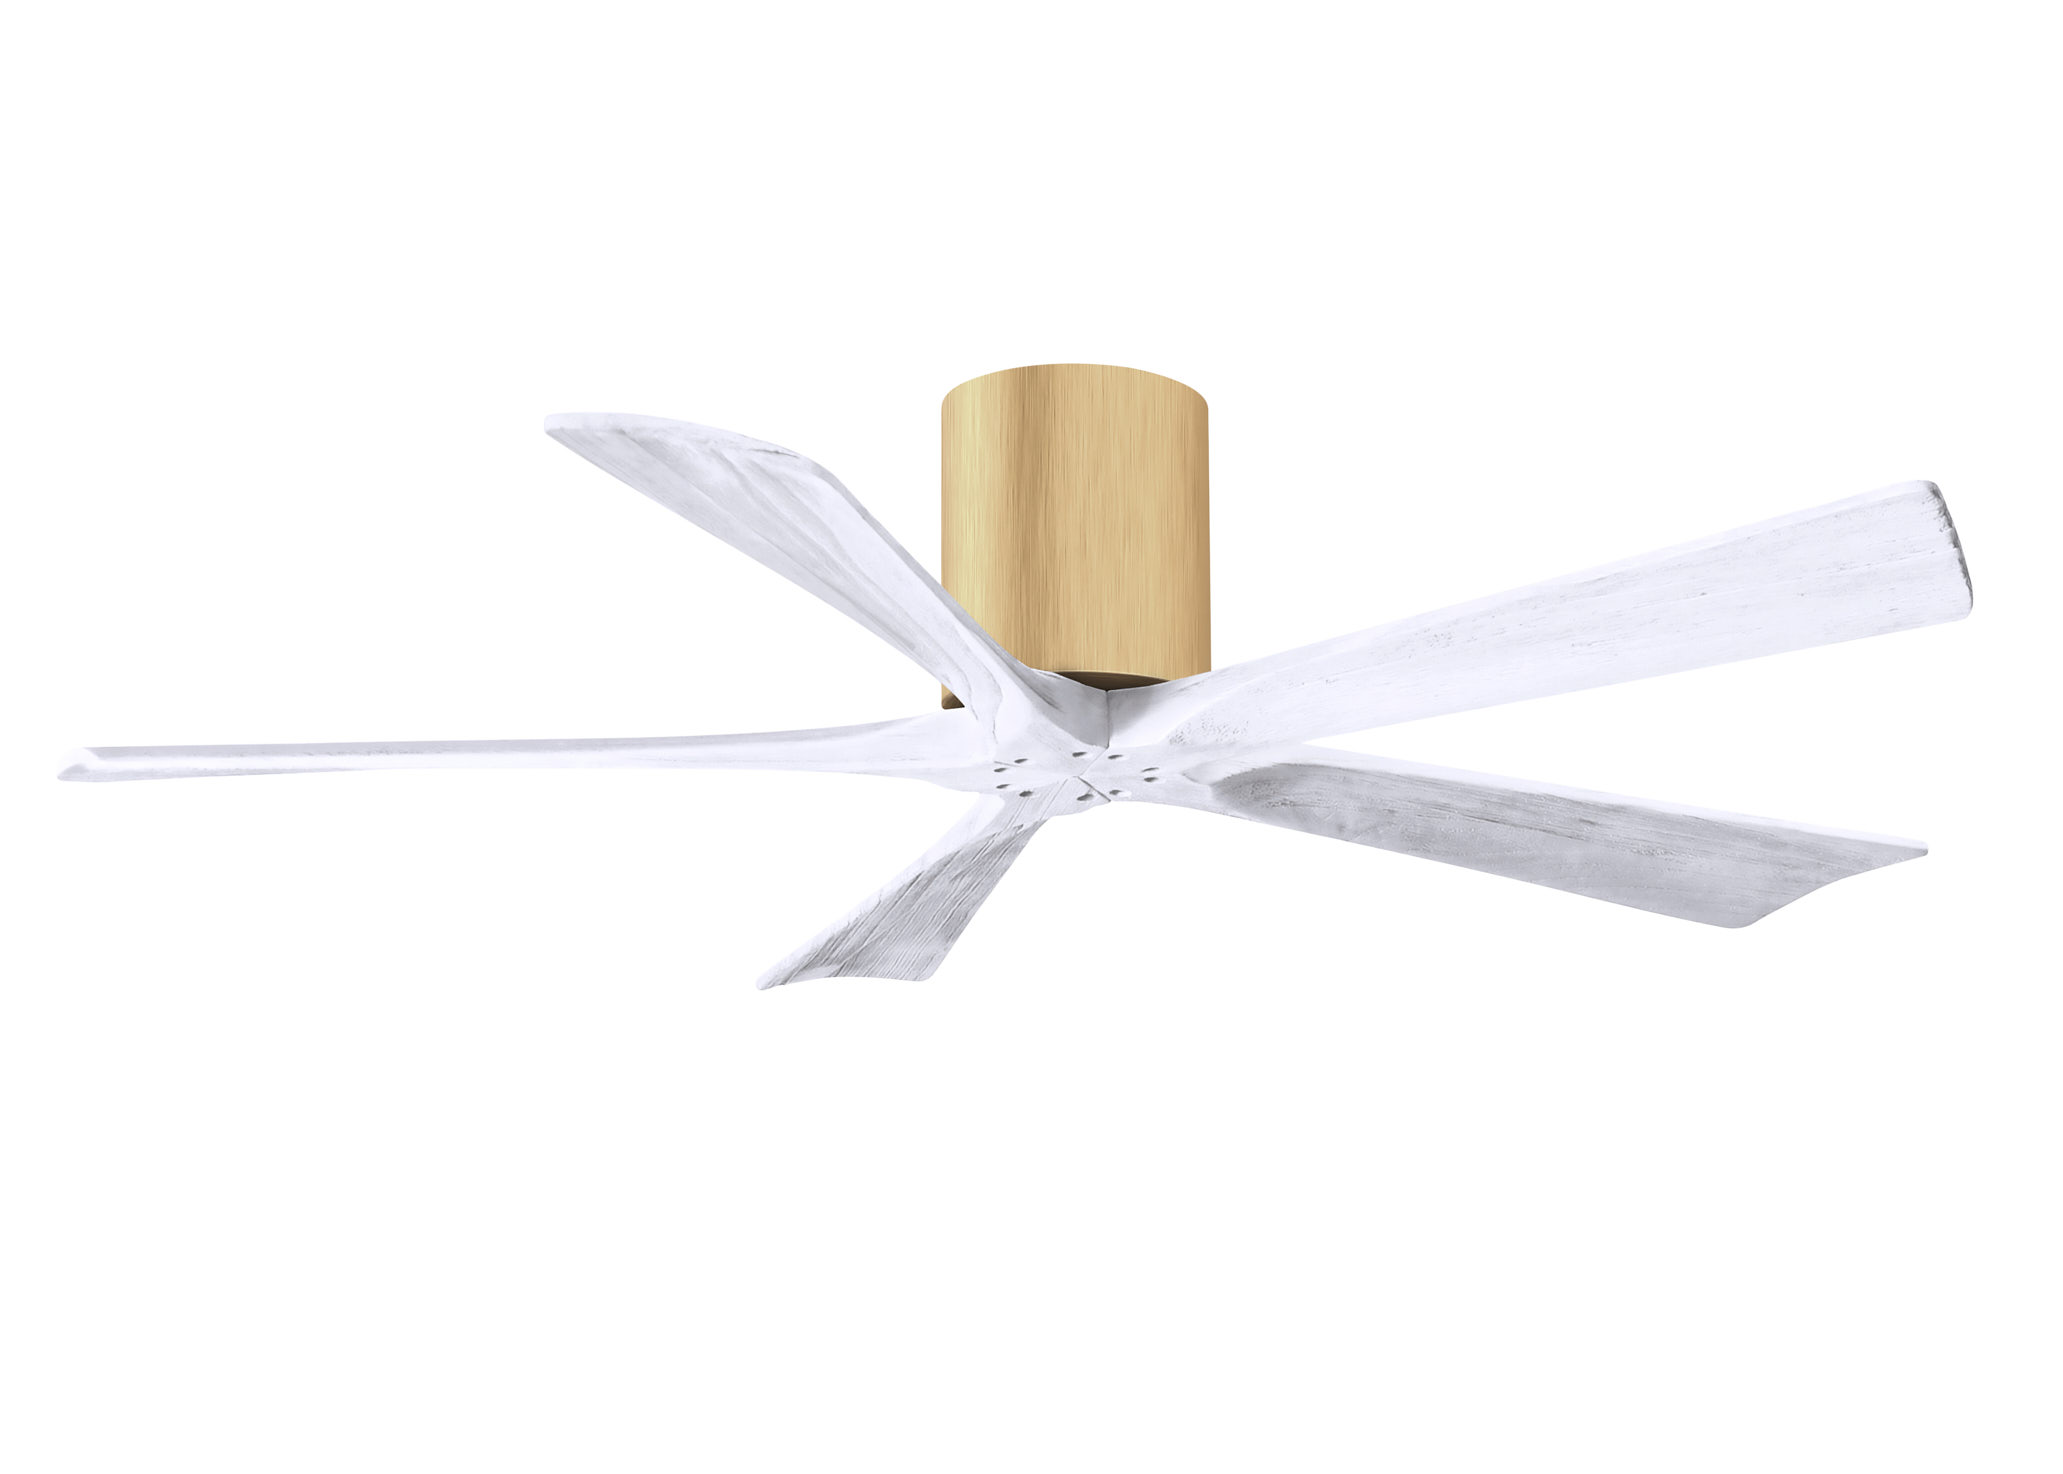 Irene-5H 6-speed ceiling fan in light maple finish with 52